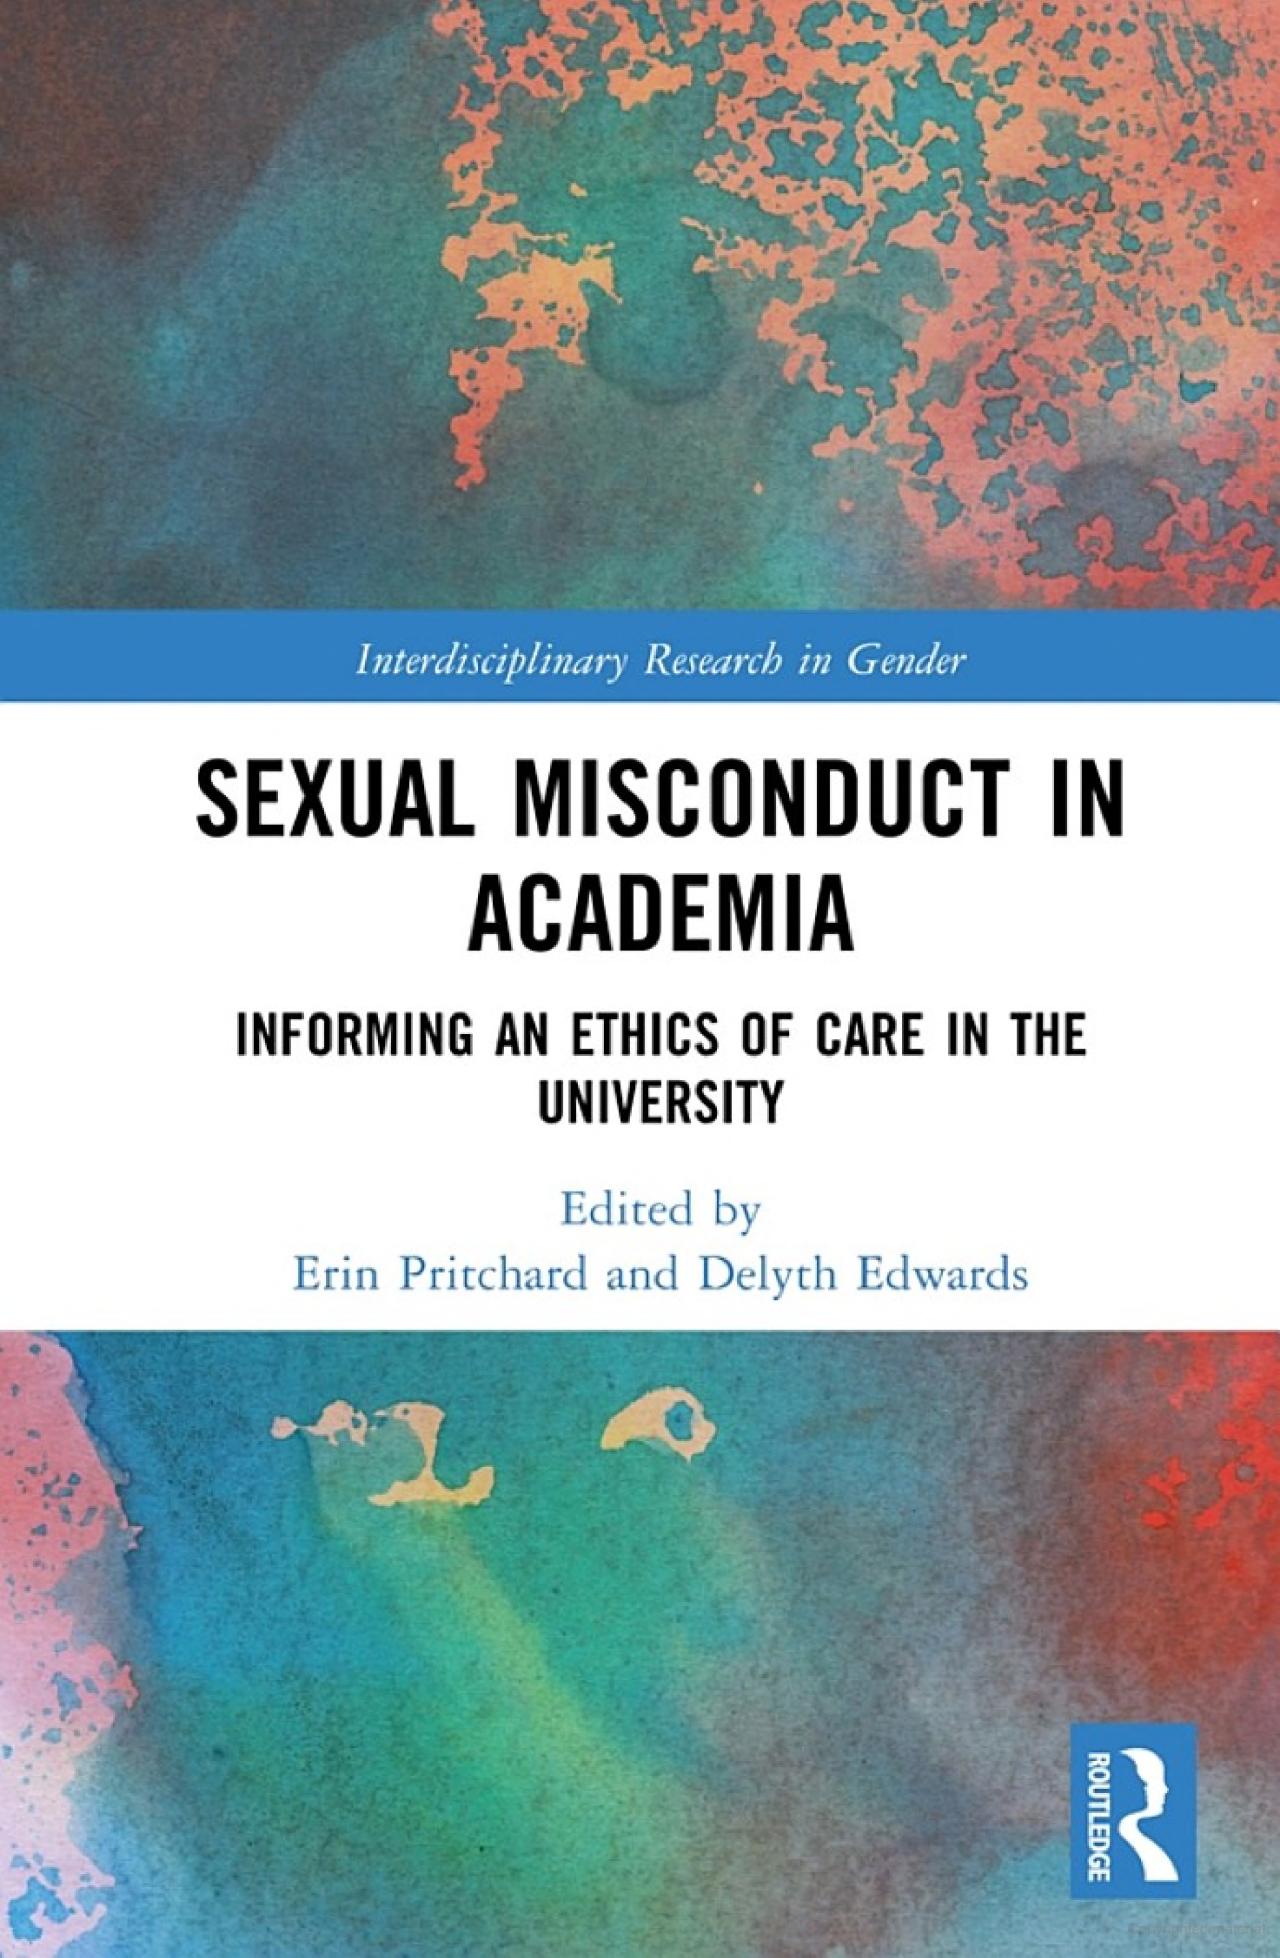 Dr Delyth Edwards has book published on sexual misconduct in academia